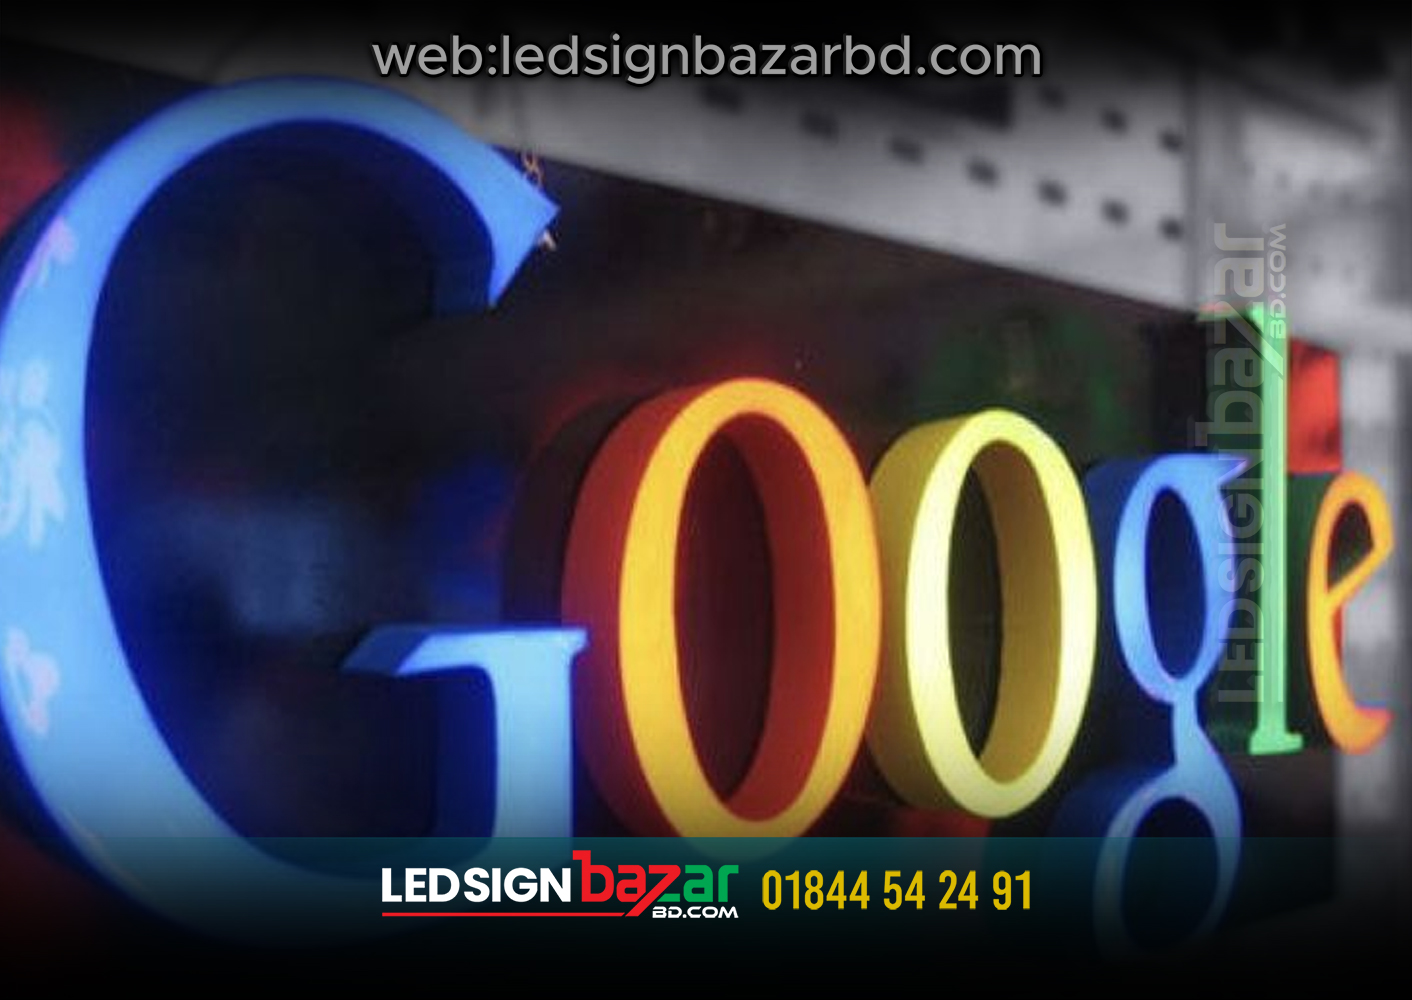 You are currently viewing On behalf of LED Sign Bazar